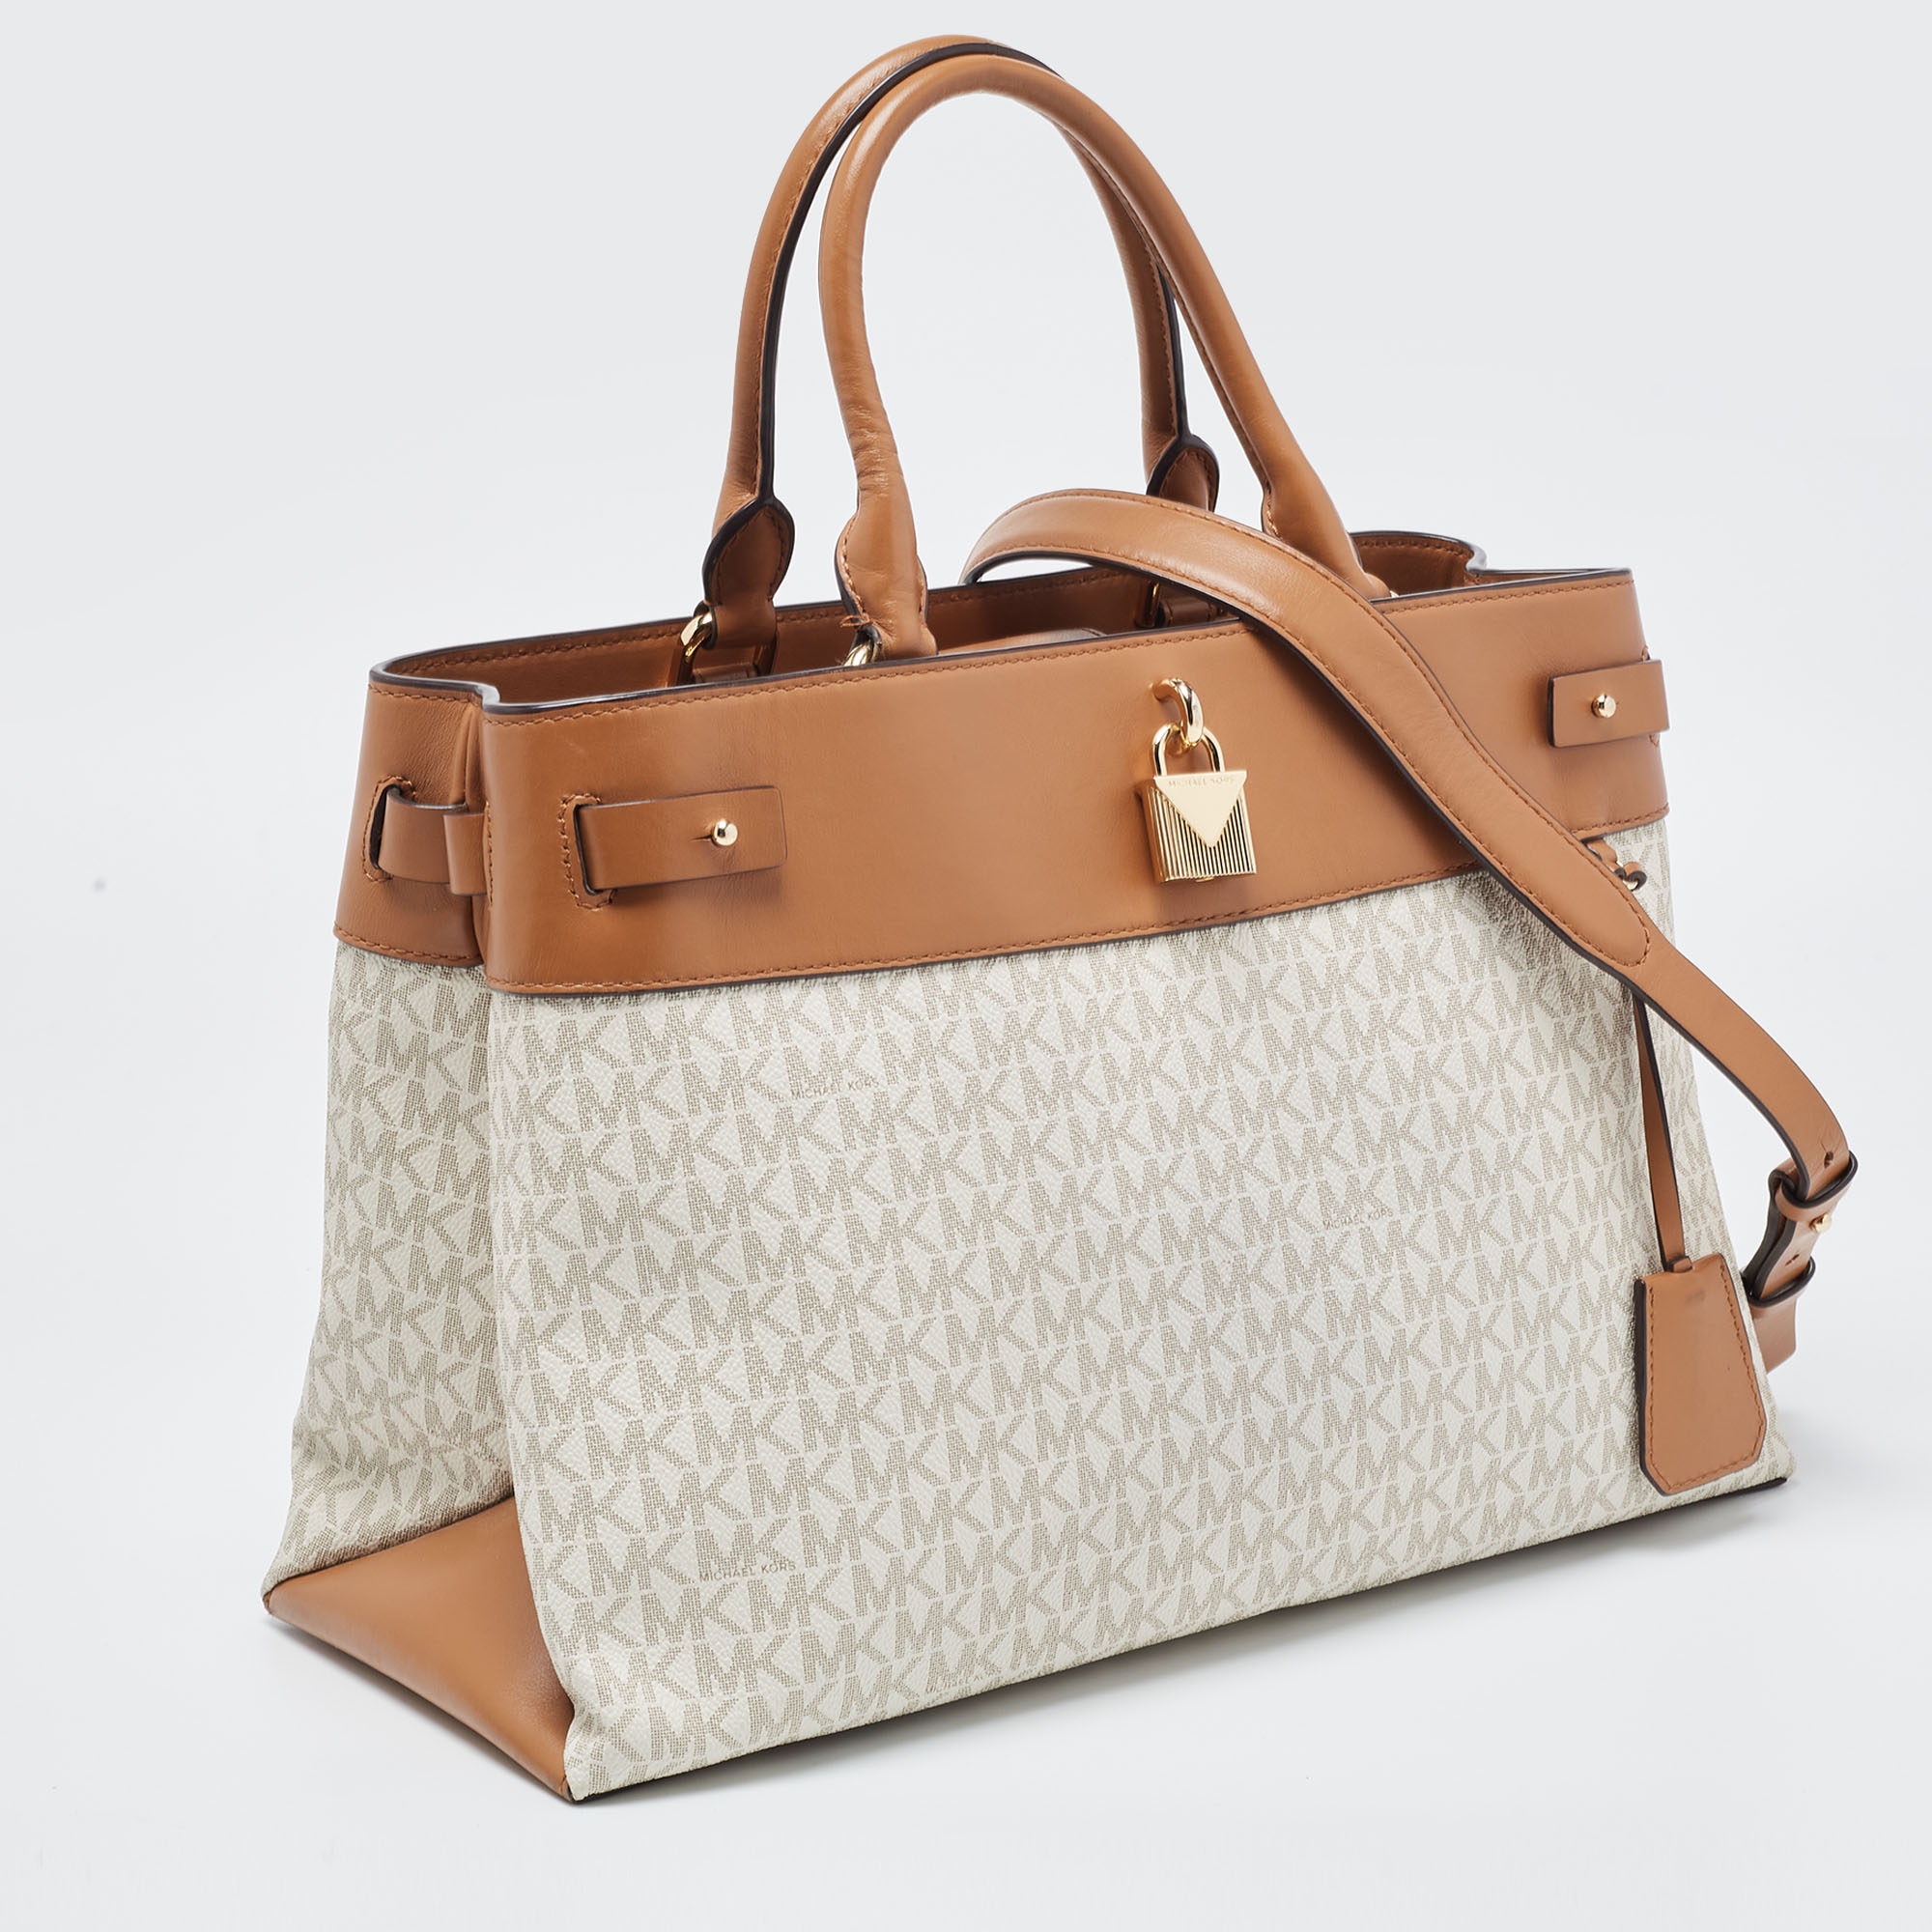 Michael Kors Beige/Tan Signature Coated Canvas And Leather Gramercy Tote